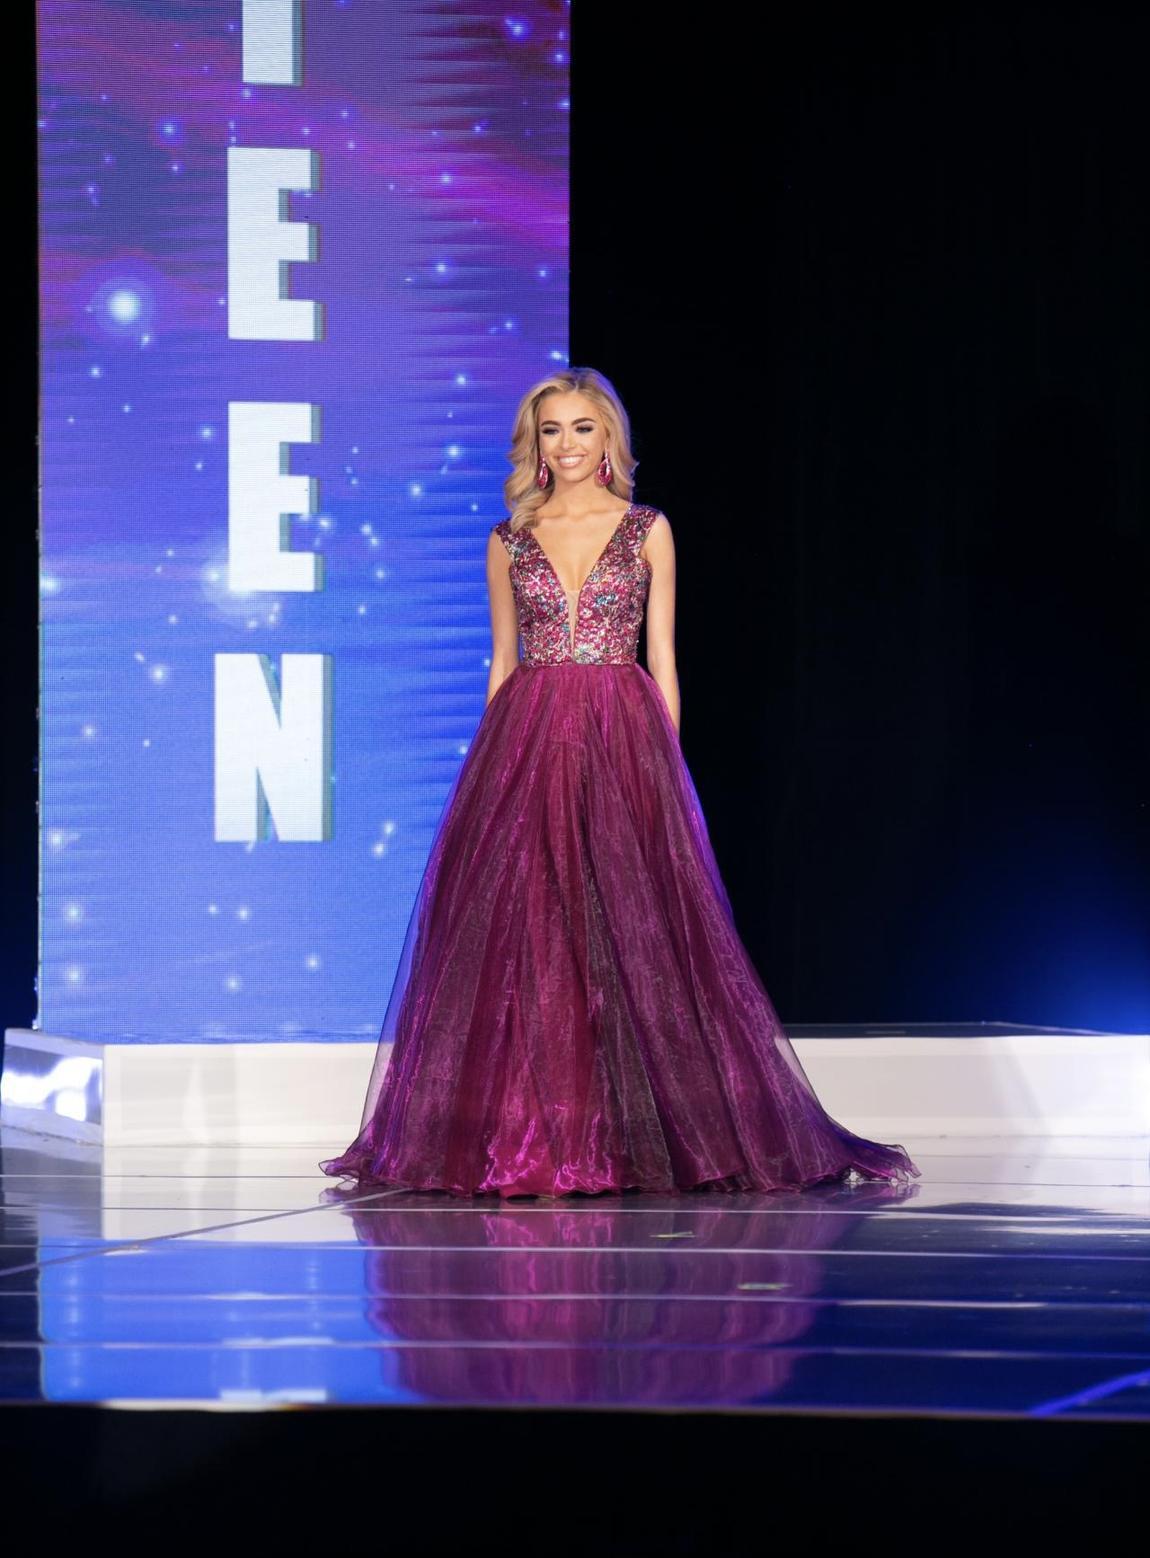 Sherri Hill Size 00 Purple Ball Gown on Queenly